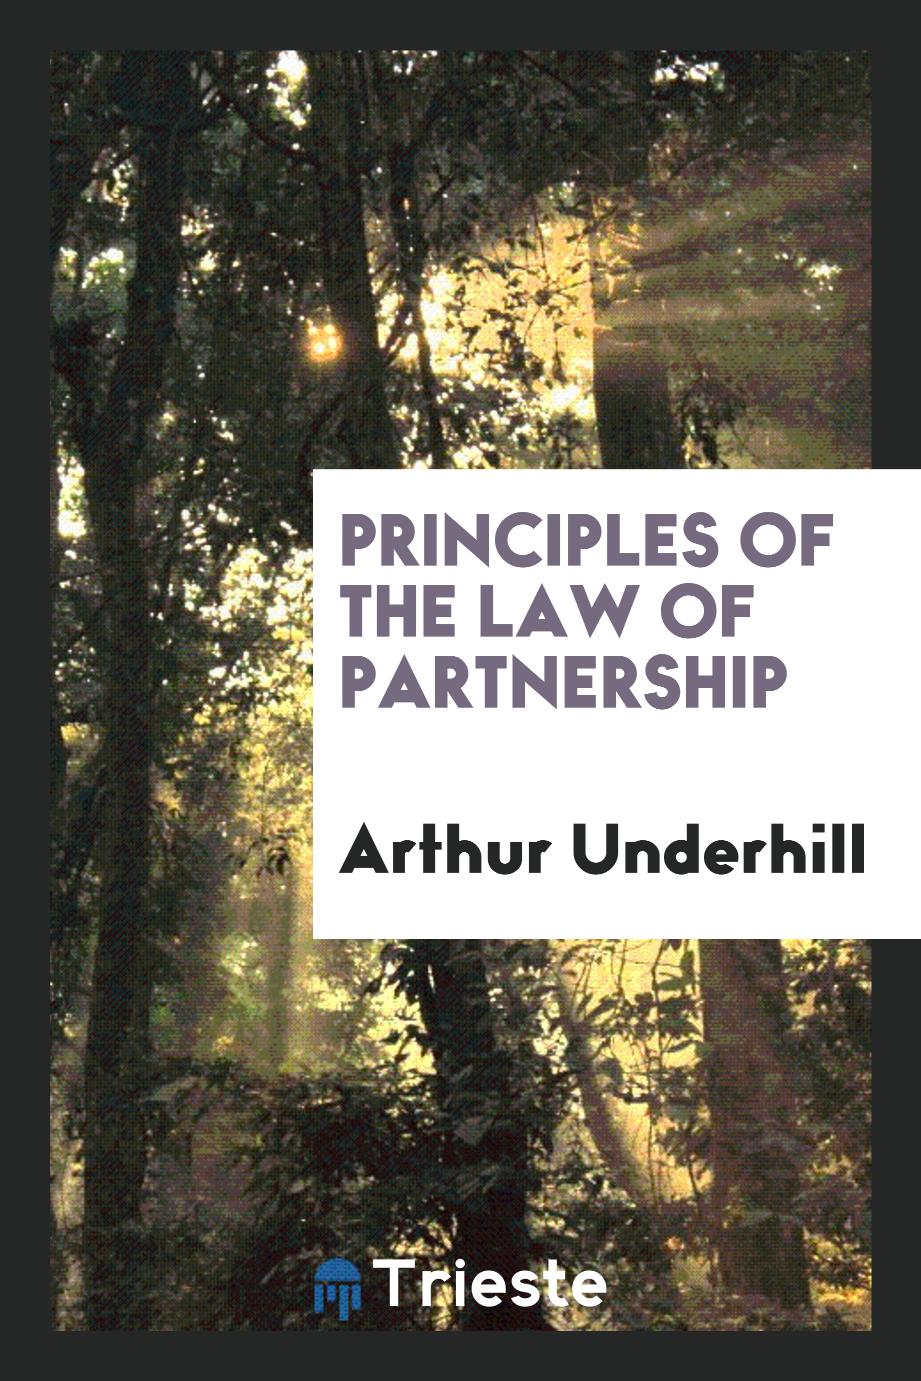 Principles of the law of partnership